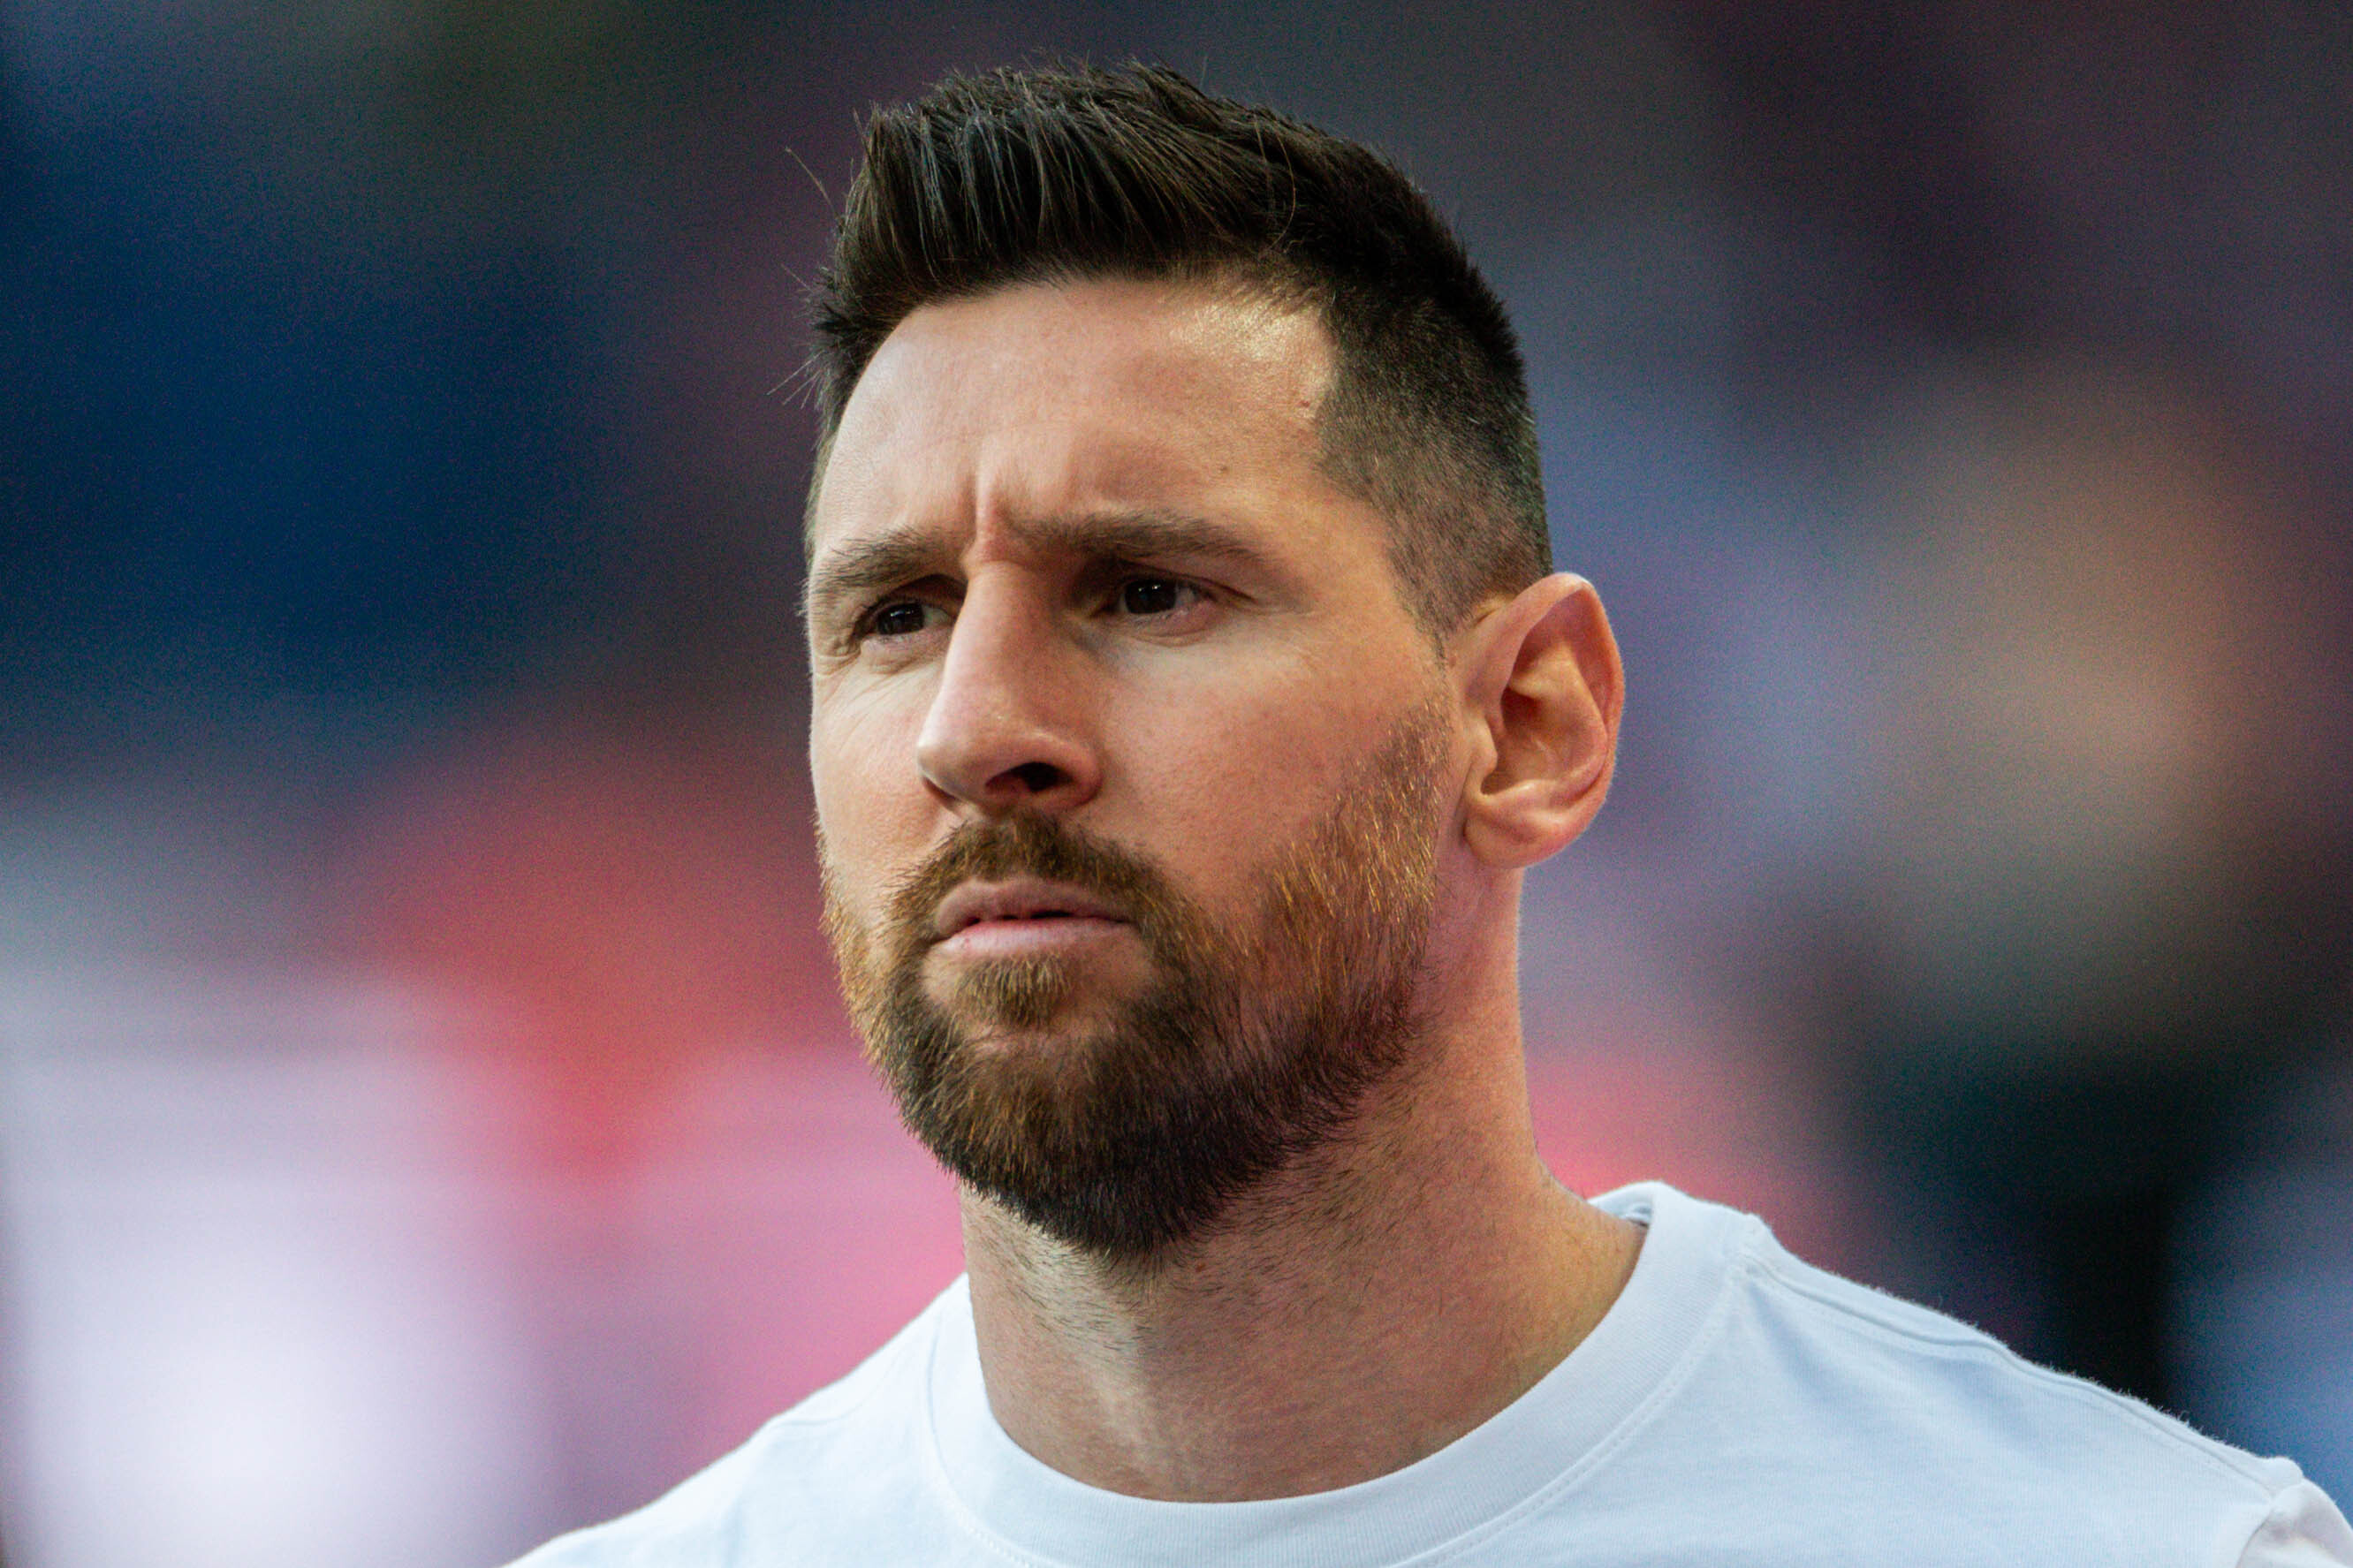 Lionel Messi reveals real reason behind dramatic hairstyle change |  Independent.ie